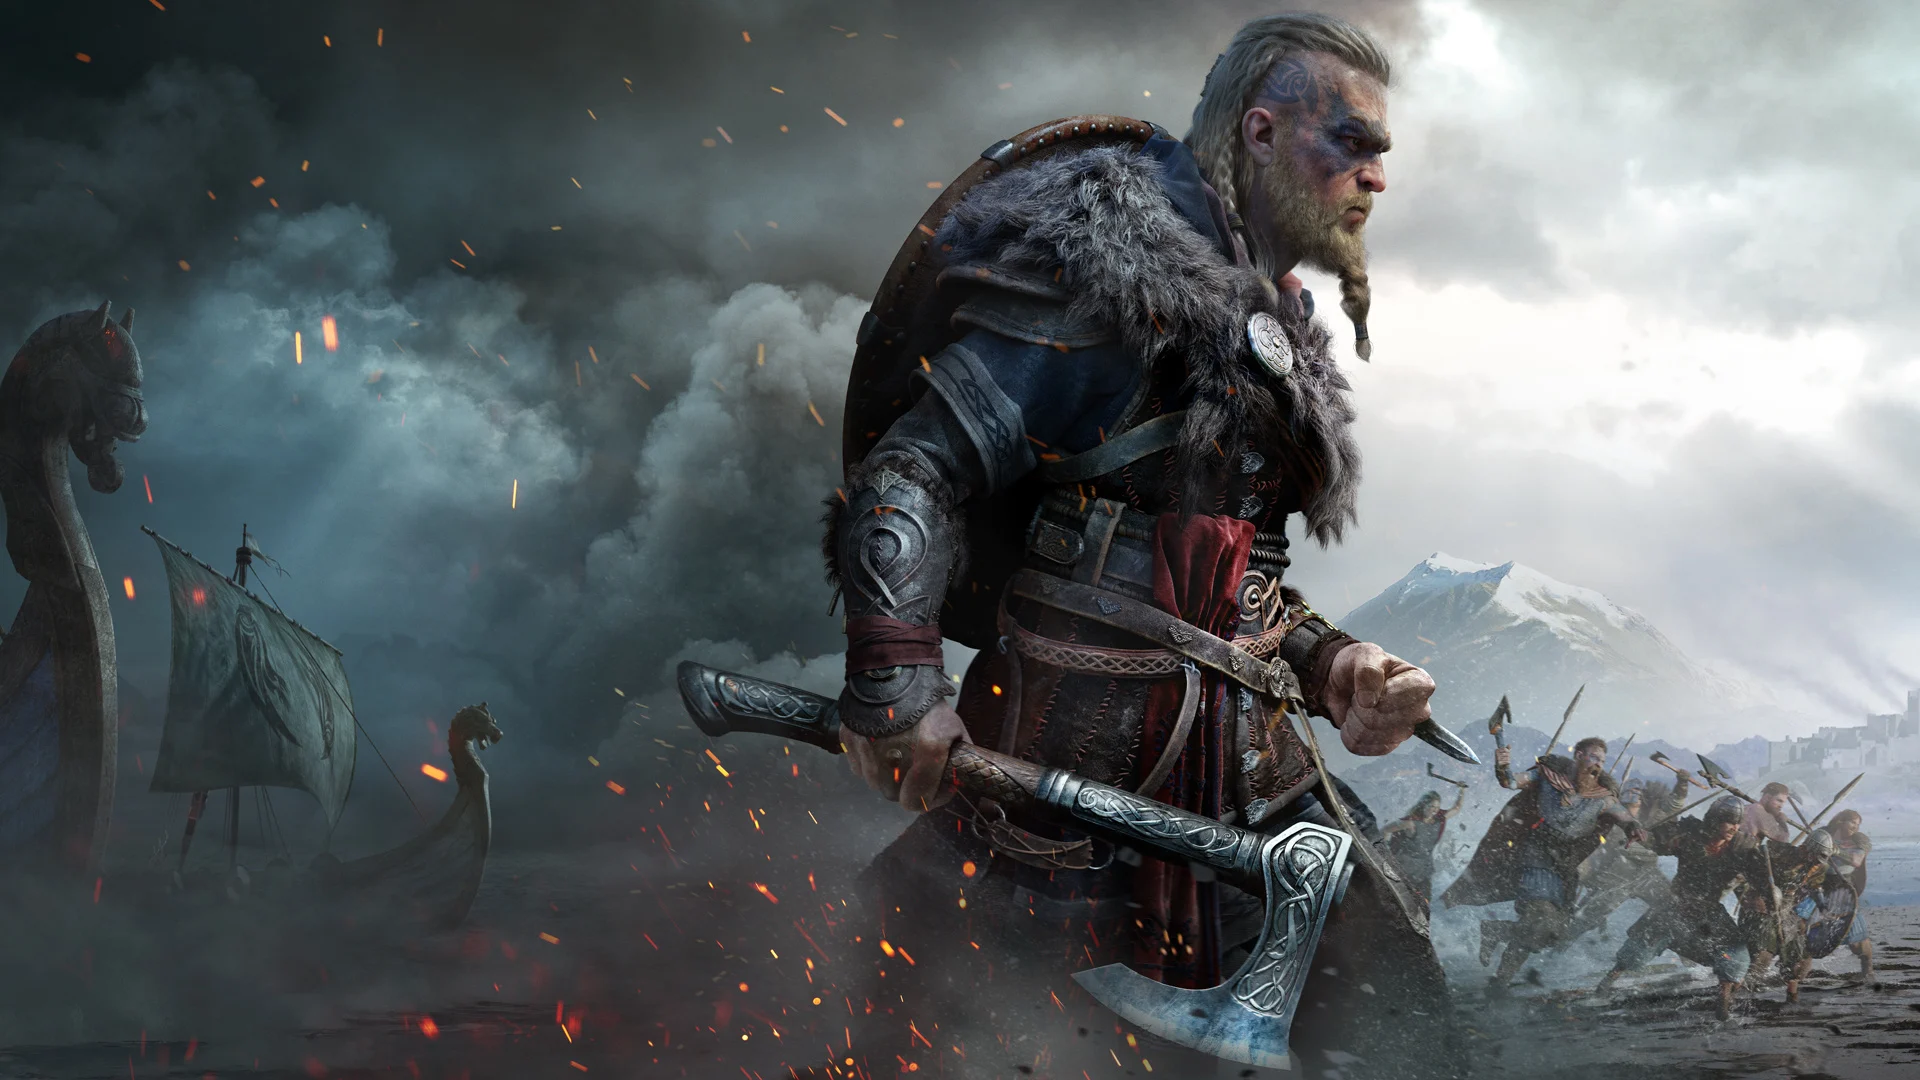 The composer of the Ezio trilogy will be scoring Assassin’s Creed Valhalla